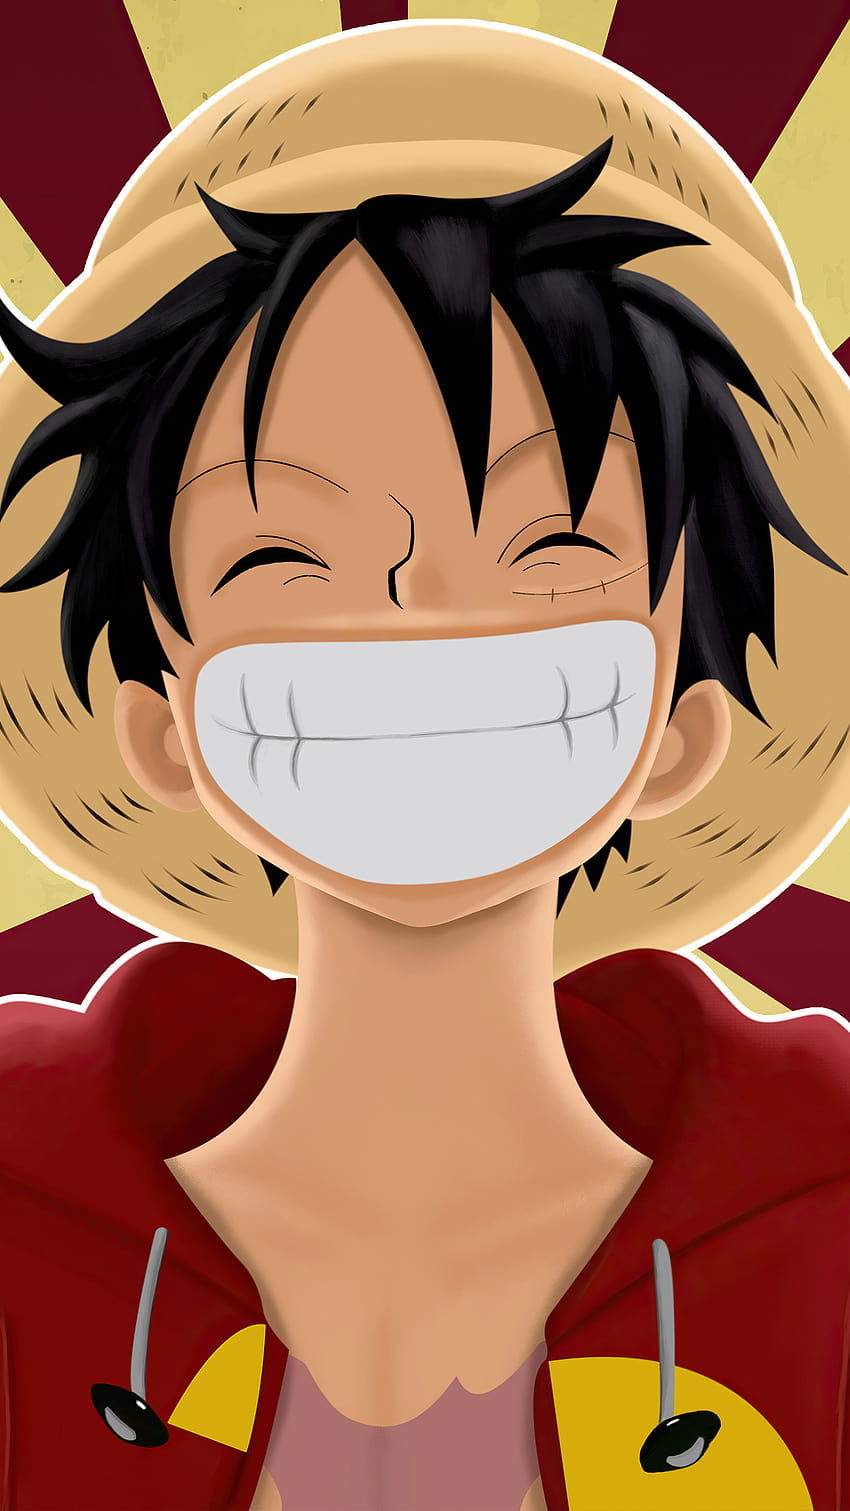 1440x2560 Pirate Monkey D Luffy from One Piece Samsung Galaxy S6,S7 ,Google Pixel XL ,Nexus 6,6P ,LG G5 , Backgrounds, and, ルフィの笑顔 HD電話の壁紙